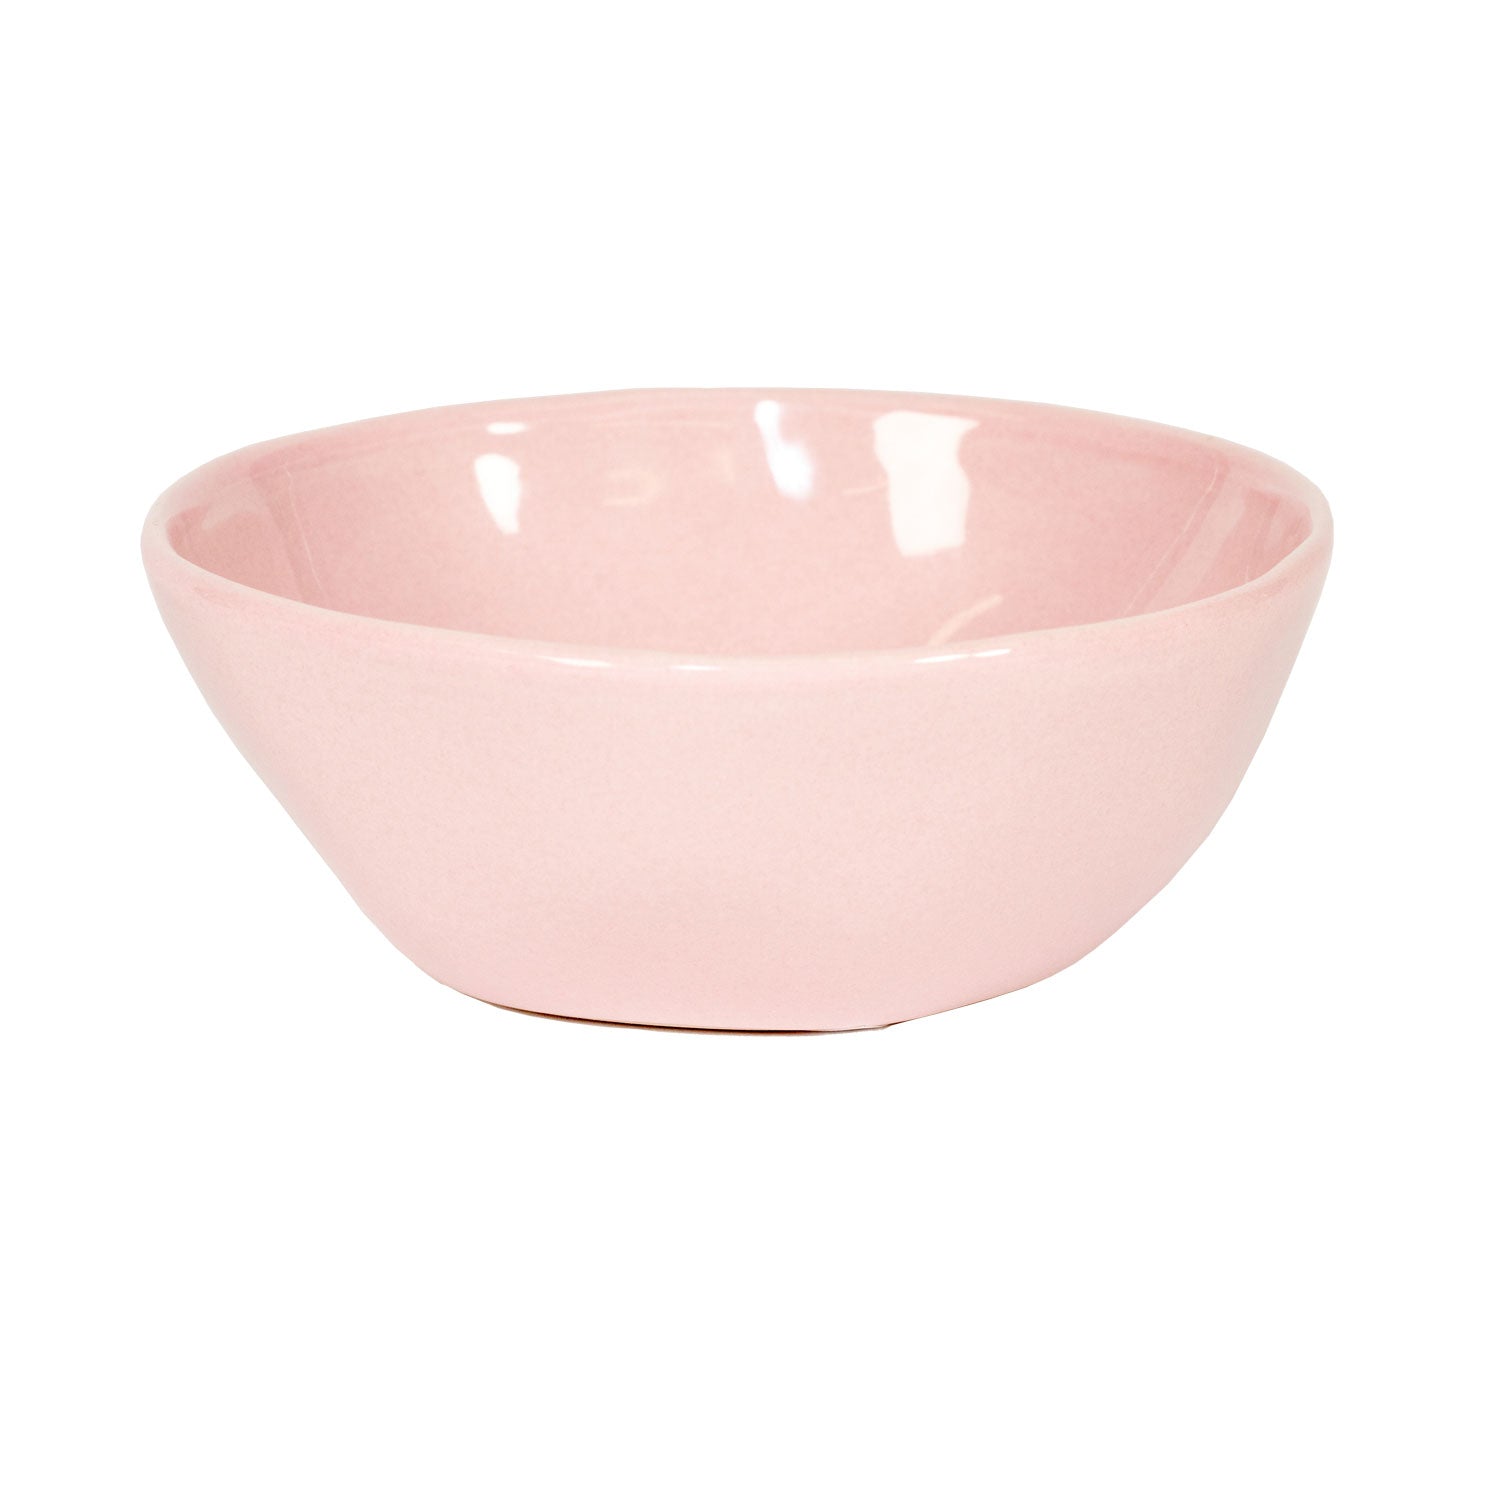 Small Dipping Bowl in Pale Pink